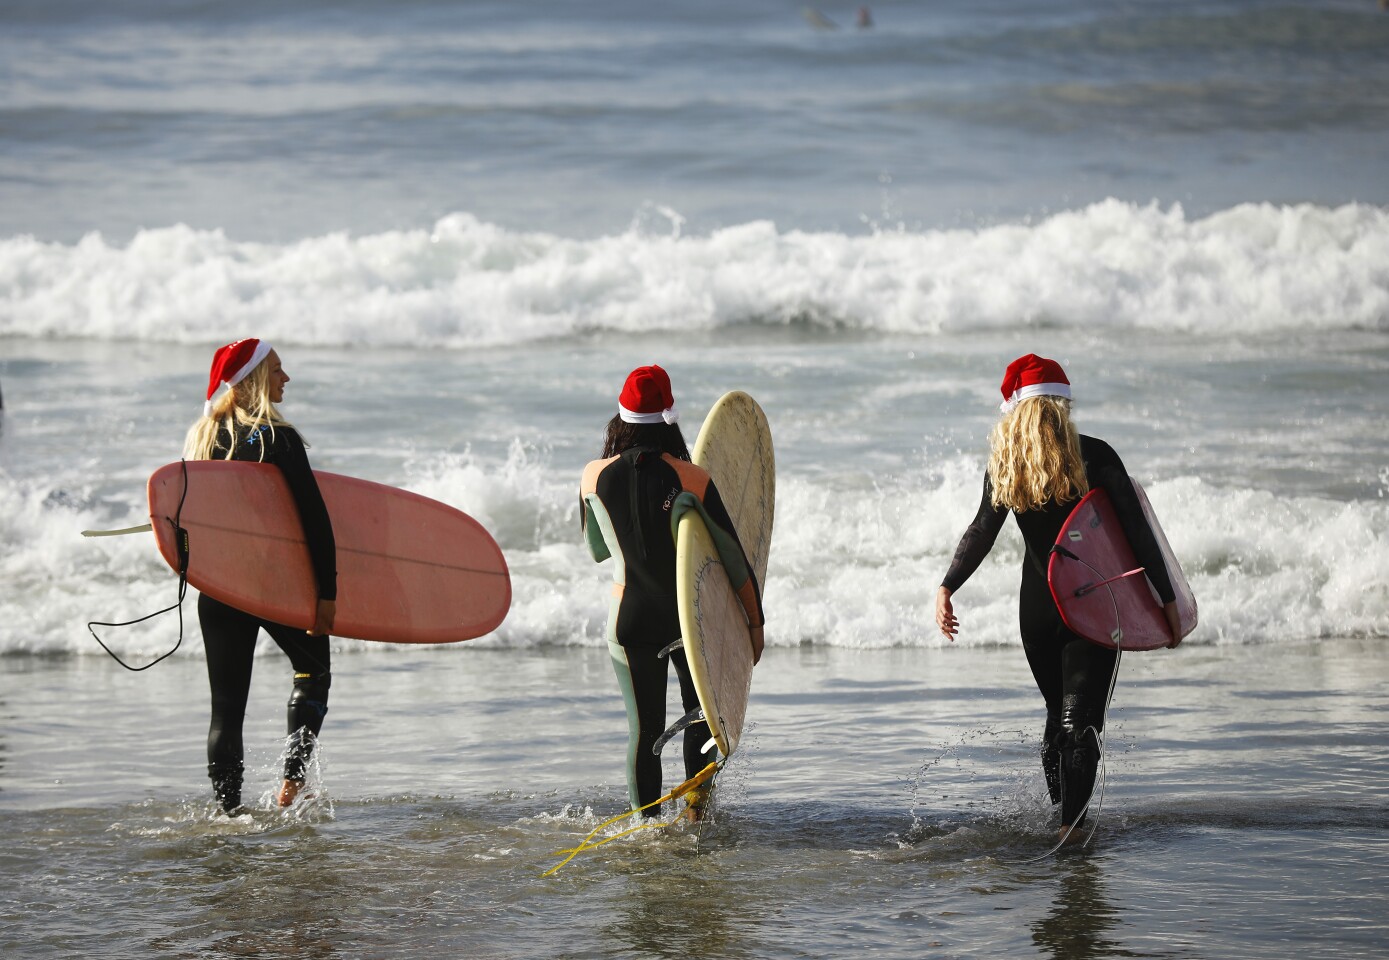 Wearing Santa hats, Crissy Seggerman, left, Heather Nagey, and Kaitlyn Johnson walk out to surf during the 9th Annual URT Santa Surf Off and Toy Drive in Coronado on Dec. 24, 2019.